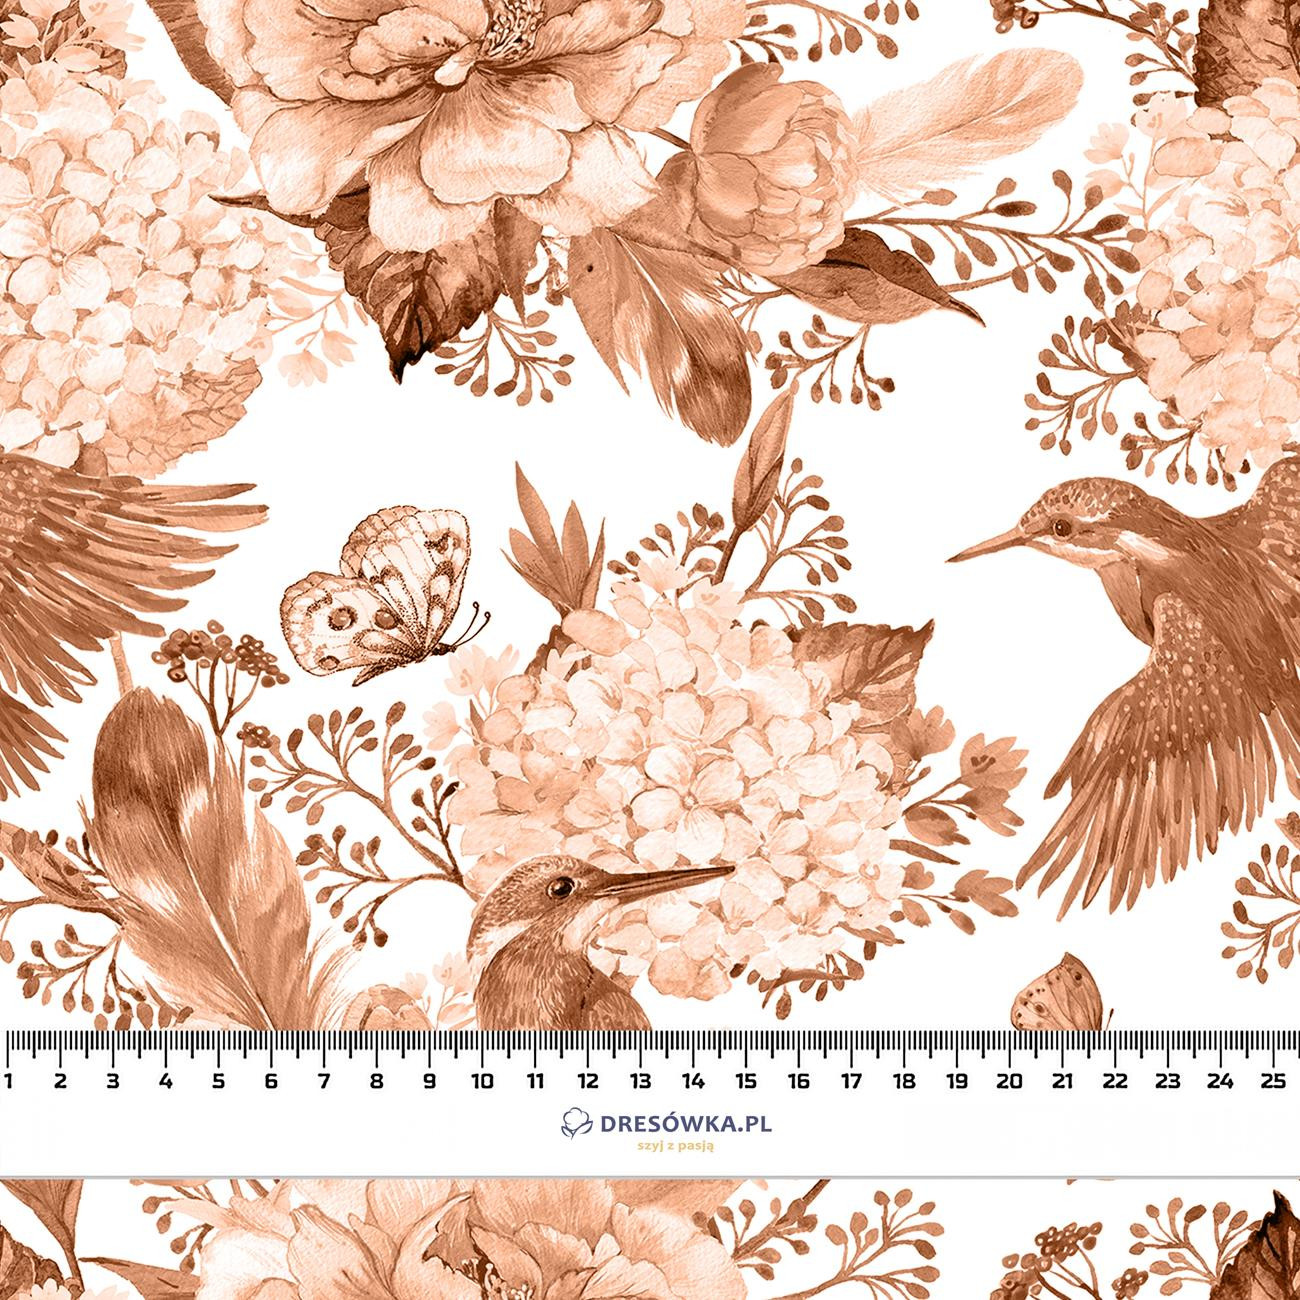 KINGFISHERS AND LILACS (KINGFISHERS IN THE MEADOW) / peach fuzz - Waterproof woven fabric